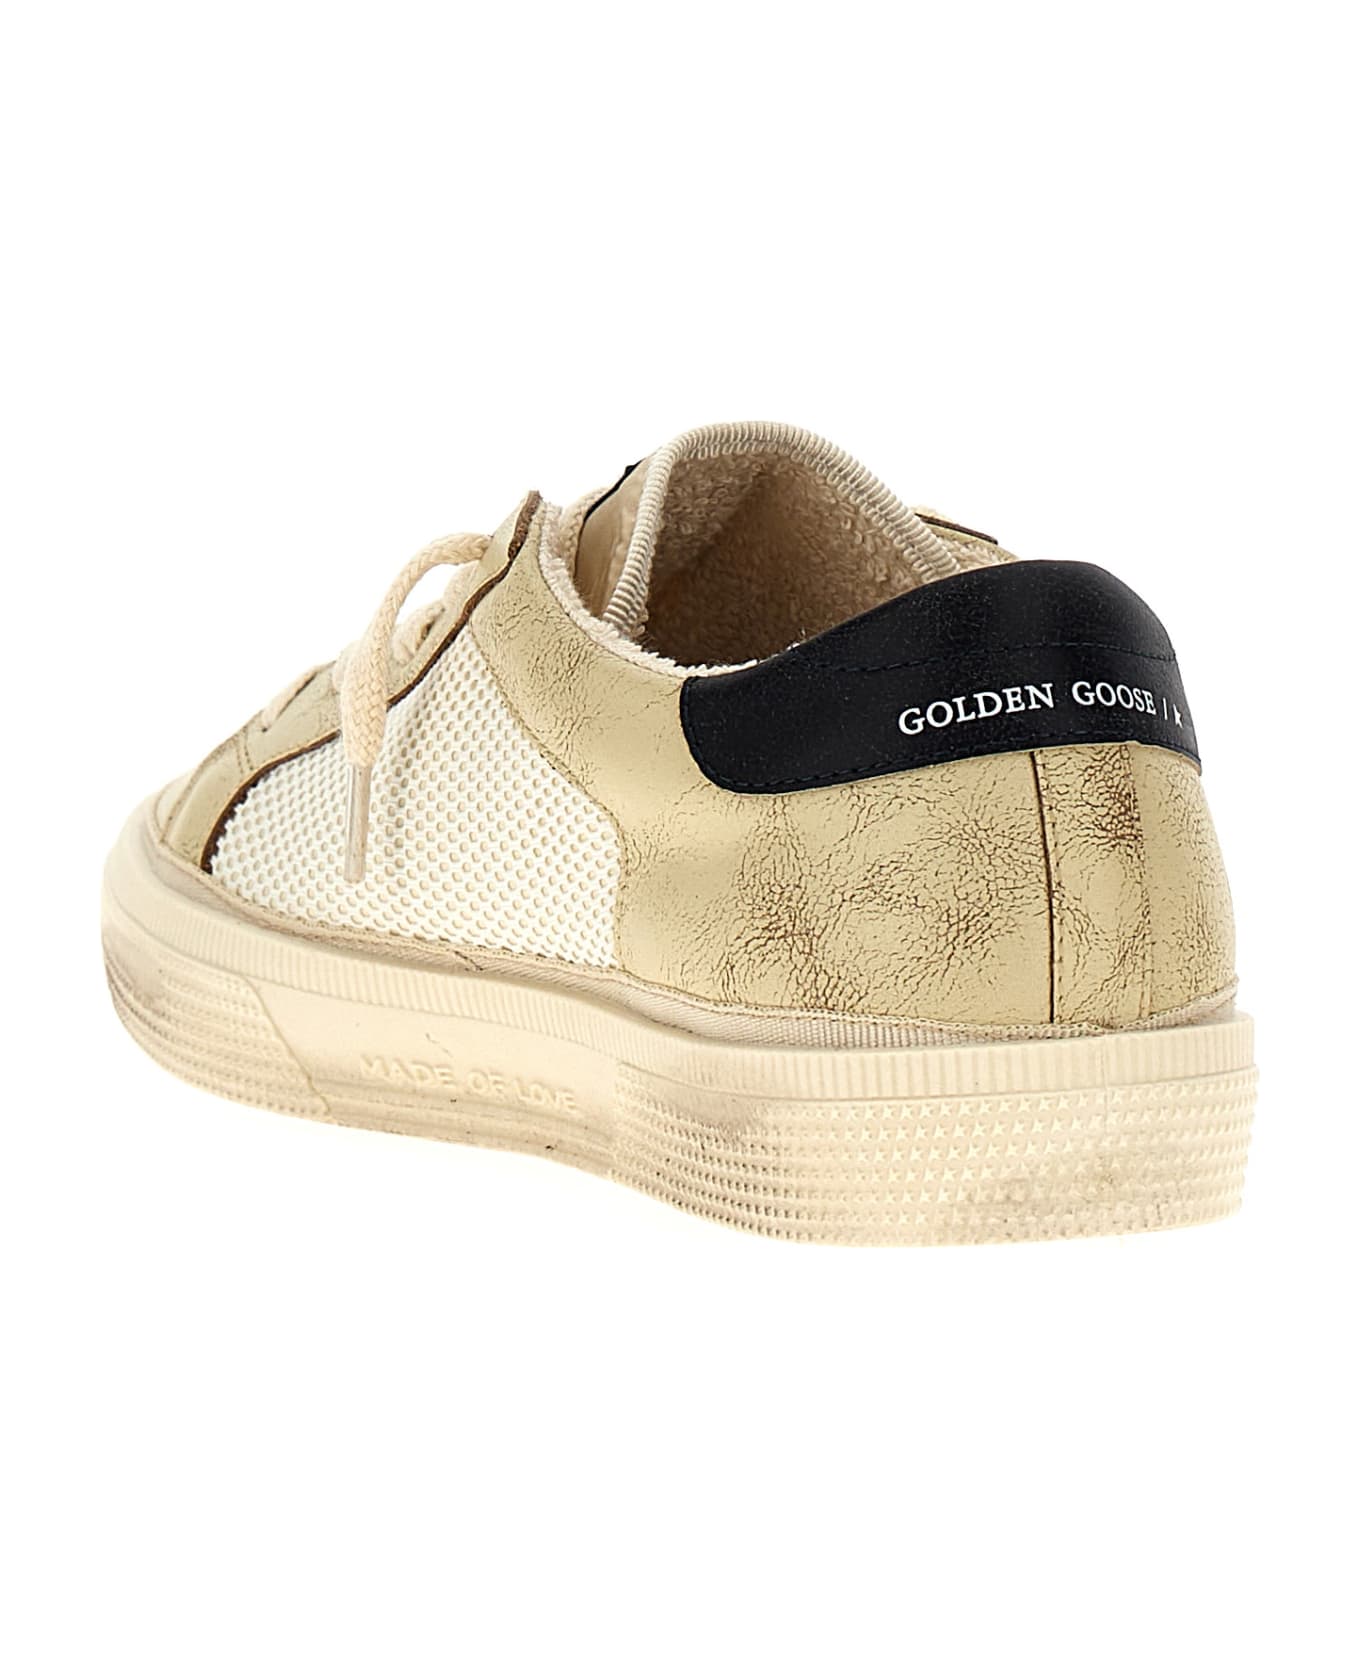 Golden Goose 'may' Sneakers - Multicolor